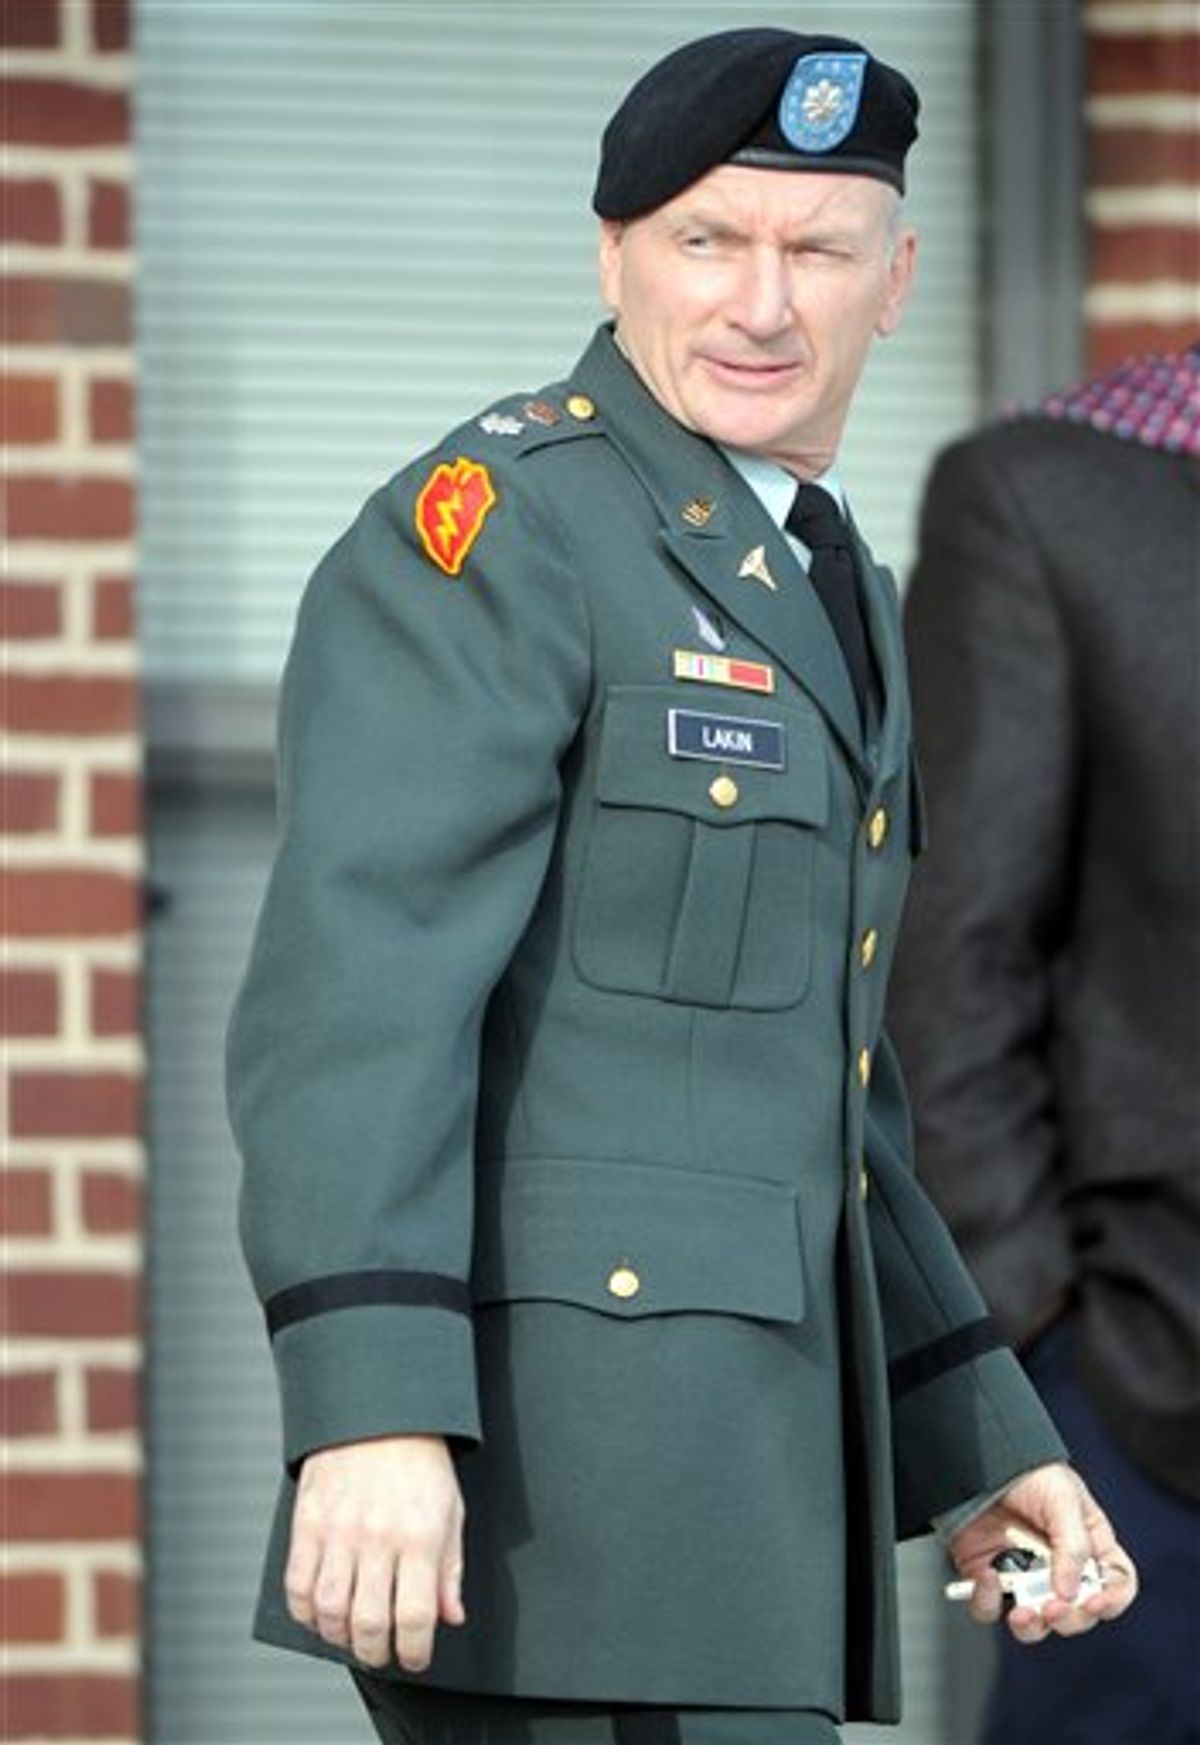 Army Lt. Col. Terrence Lakin of Greeley, Colo. leaves a military court during a break in his court-martial proceeding Tuesday, Dec. 14, 2010 at Fort Meade, Md. Lakin is being tried for allegedly refusing to deploy to Afghanistan because he does not believe that President Barack Obama was born in the United States and therefore questions his eligibility to be commander in chief. (AP Photo/Steve Ruark) (AP)